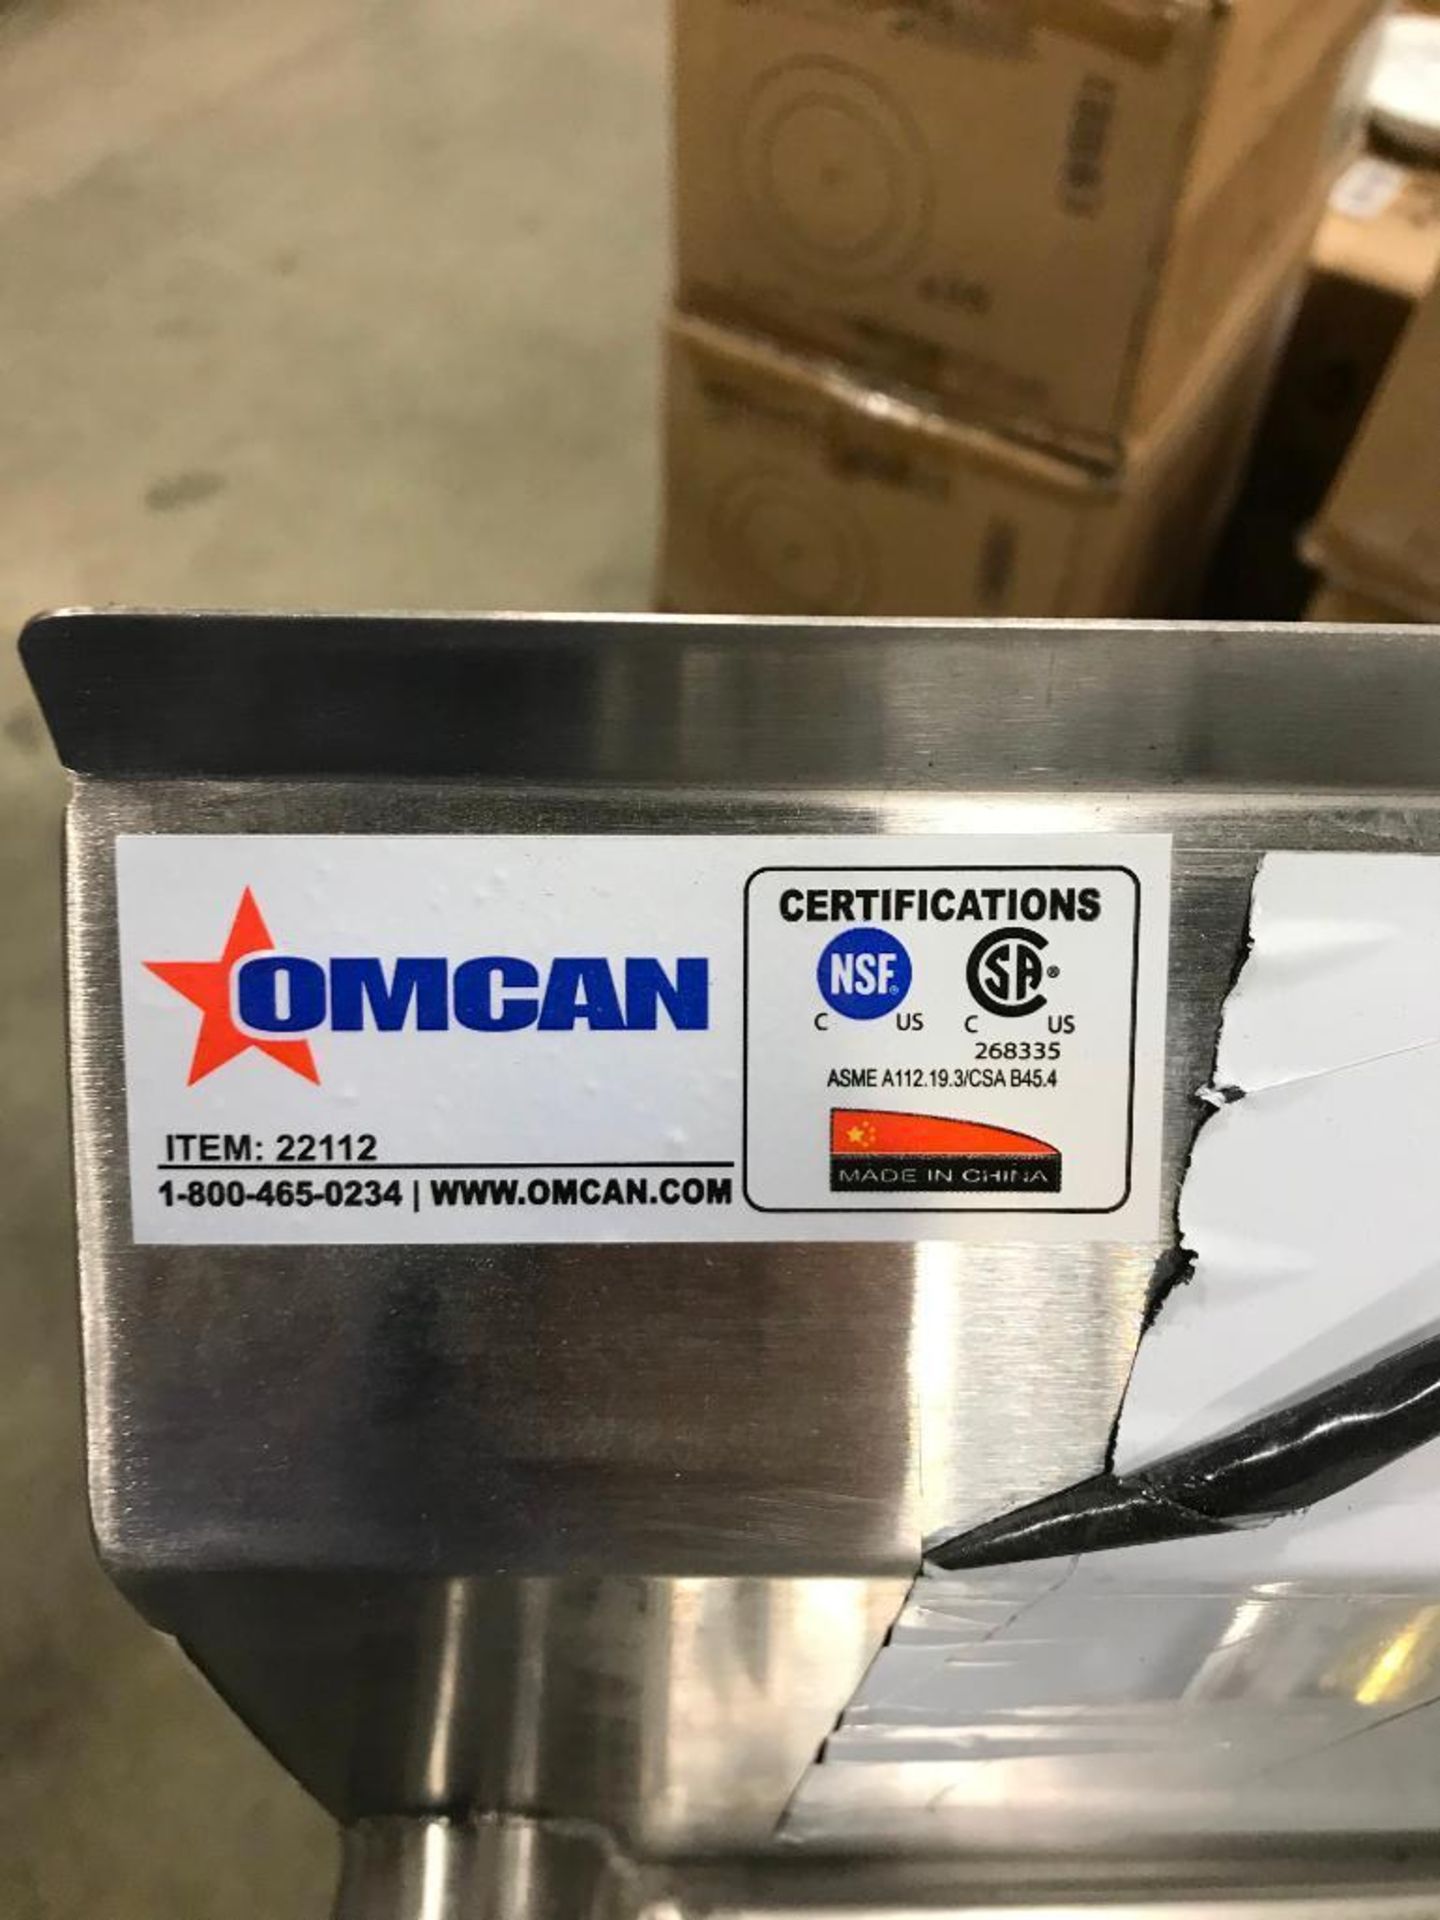 SINGLE POT SINK WITH CORNER DRAINS - OMCAN 22112 - OVERALL DIMS 24" X 28" X 40" - Image 2 of 6